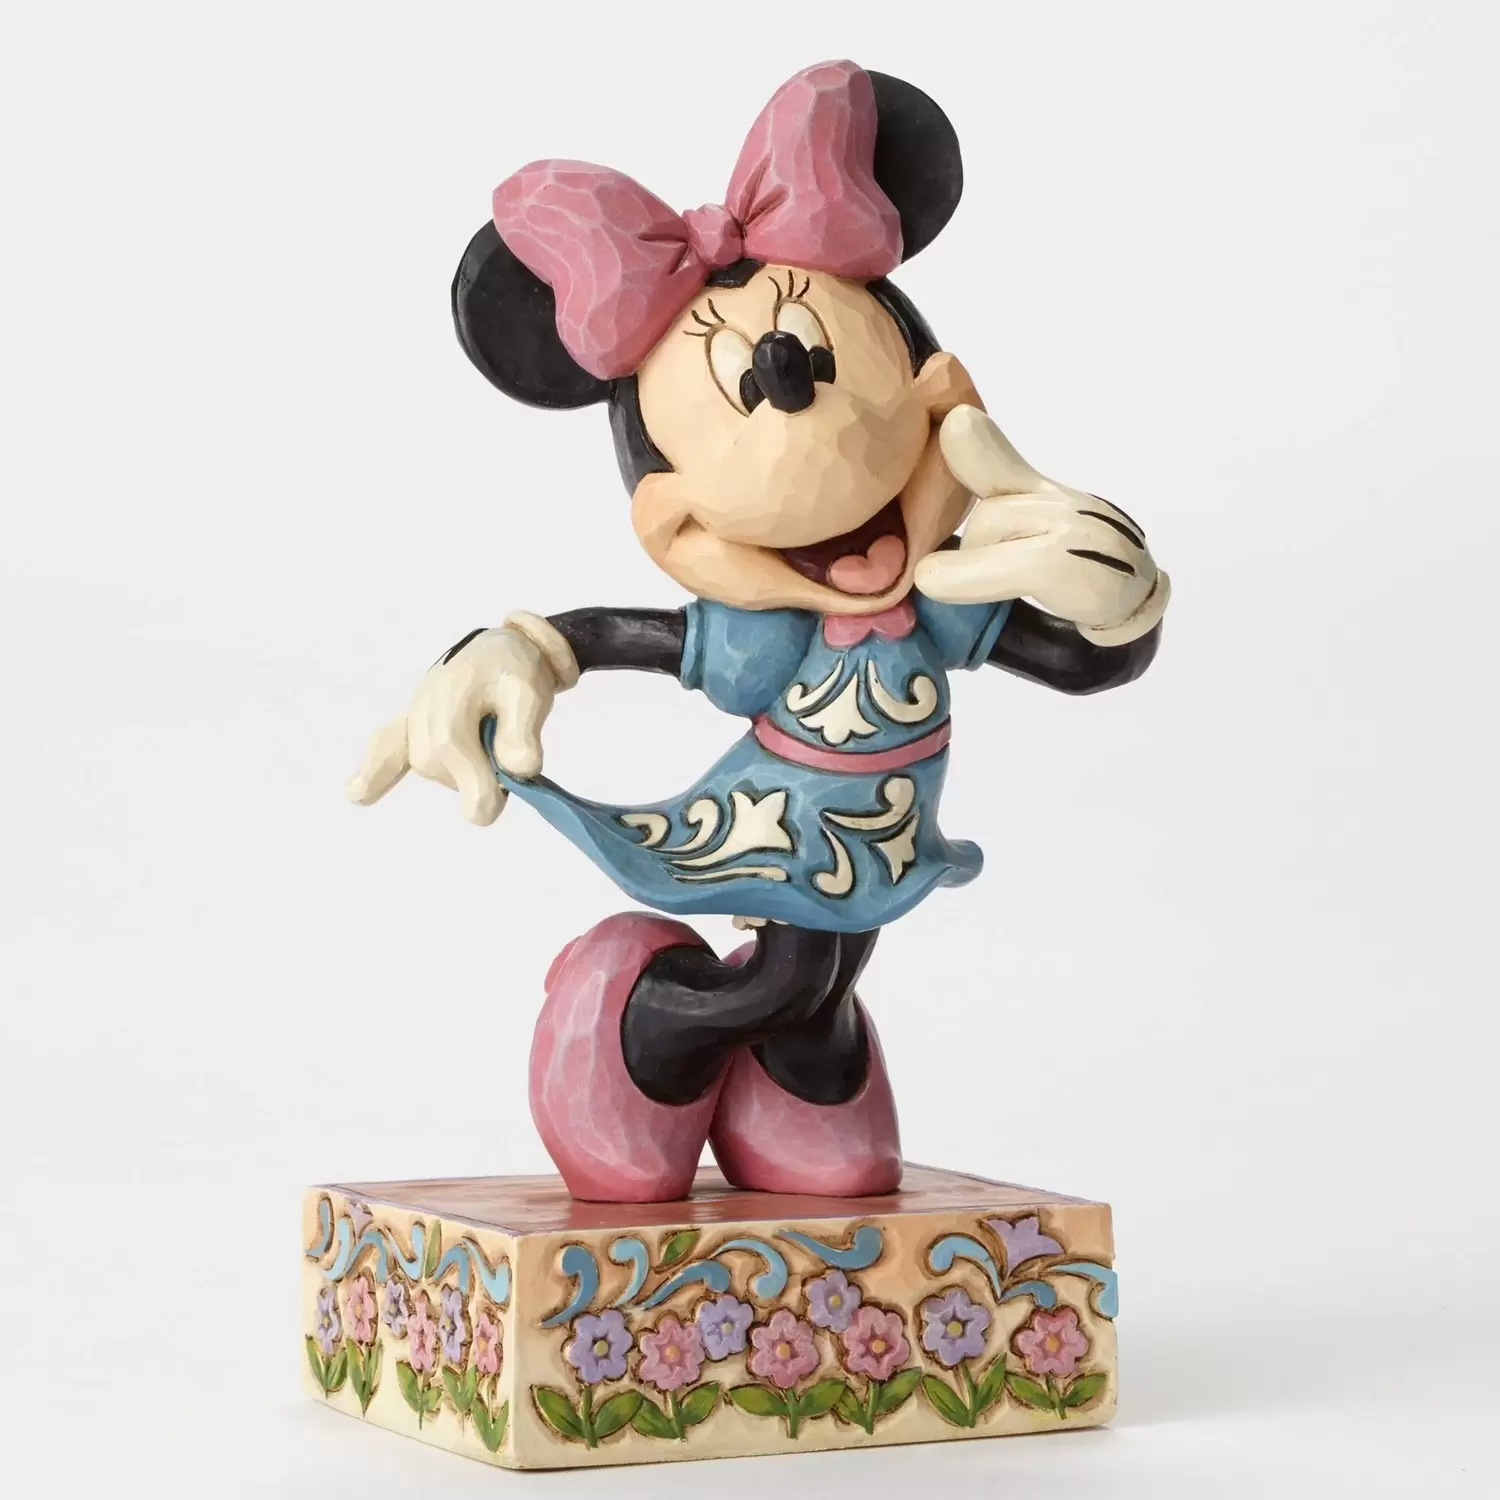 Disney Traditions by Jim Shore - Call Me - Sweetheart Minnie Mouse